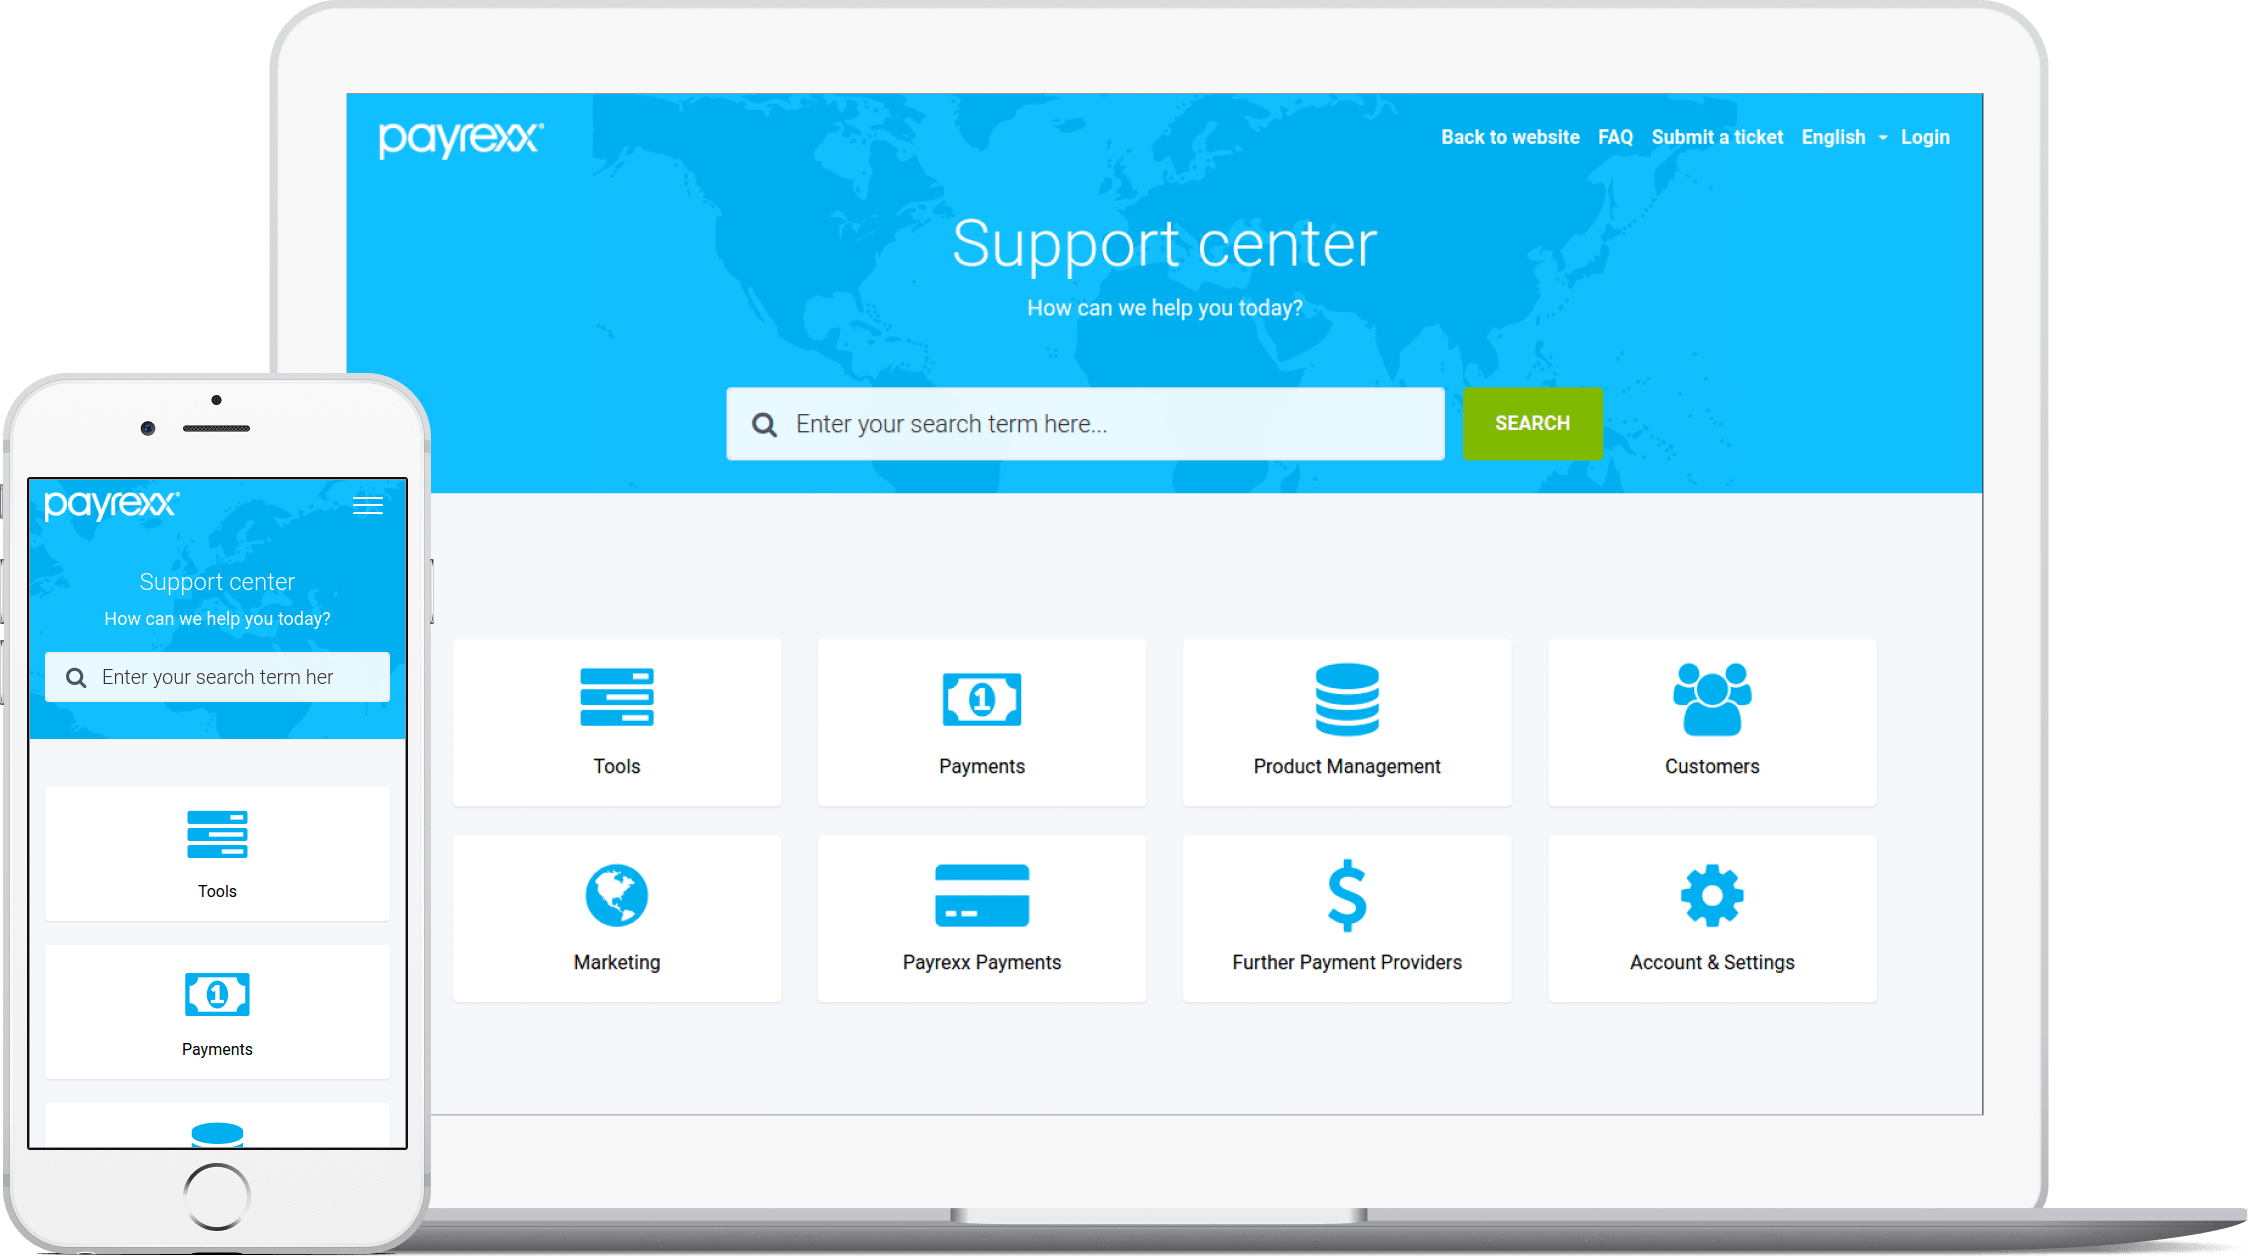 freshdesk-support-center-for-payrexx-from-breezy-t_37471.png